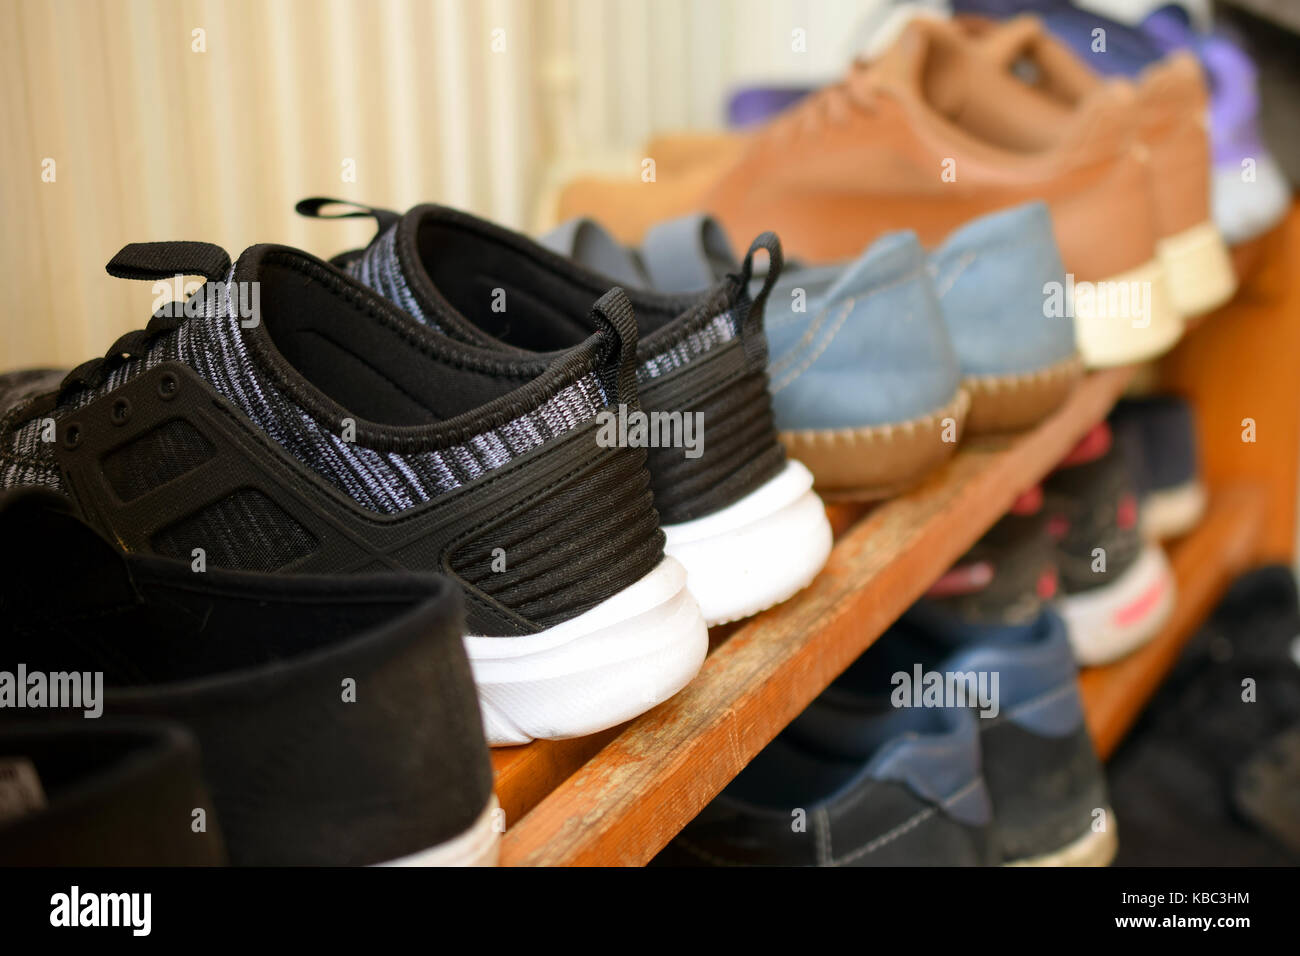 Shoes on wooden shoe rack. Close up side view image. Stock Photo